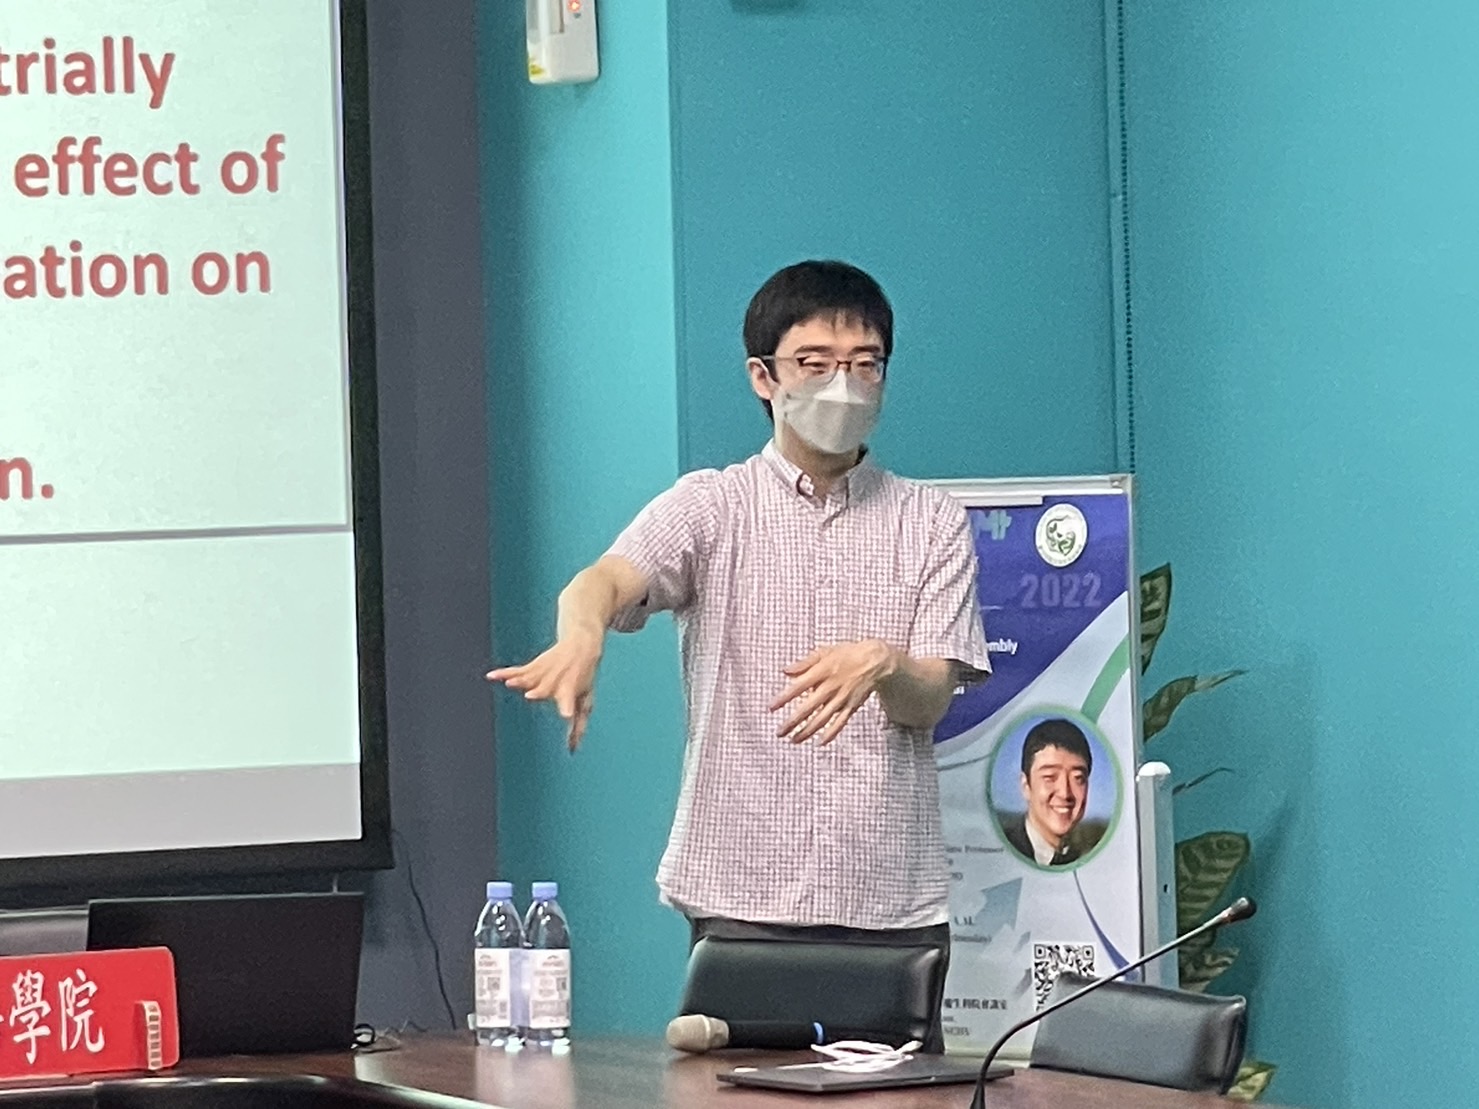 EMI WORKSHOP - Prebiotic chemistry and assembly of membraneless polyester protocells on early Earth - Dr. Tony Z. Jia Specially-Appointed Associate Professor